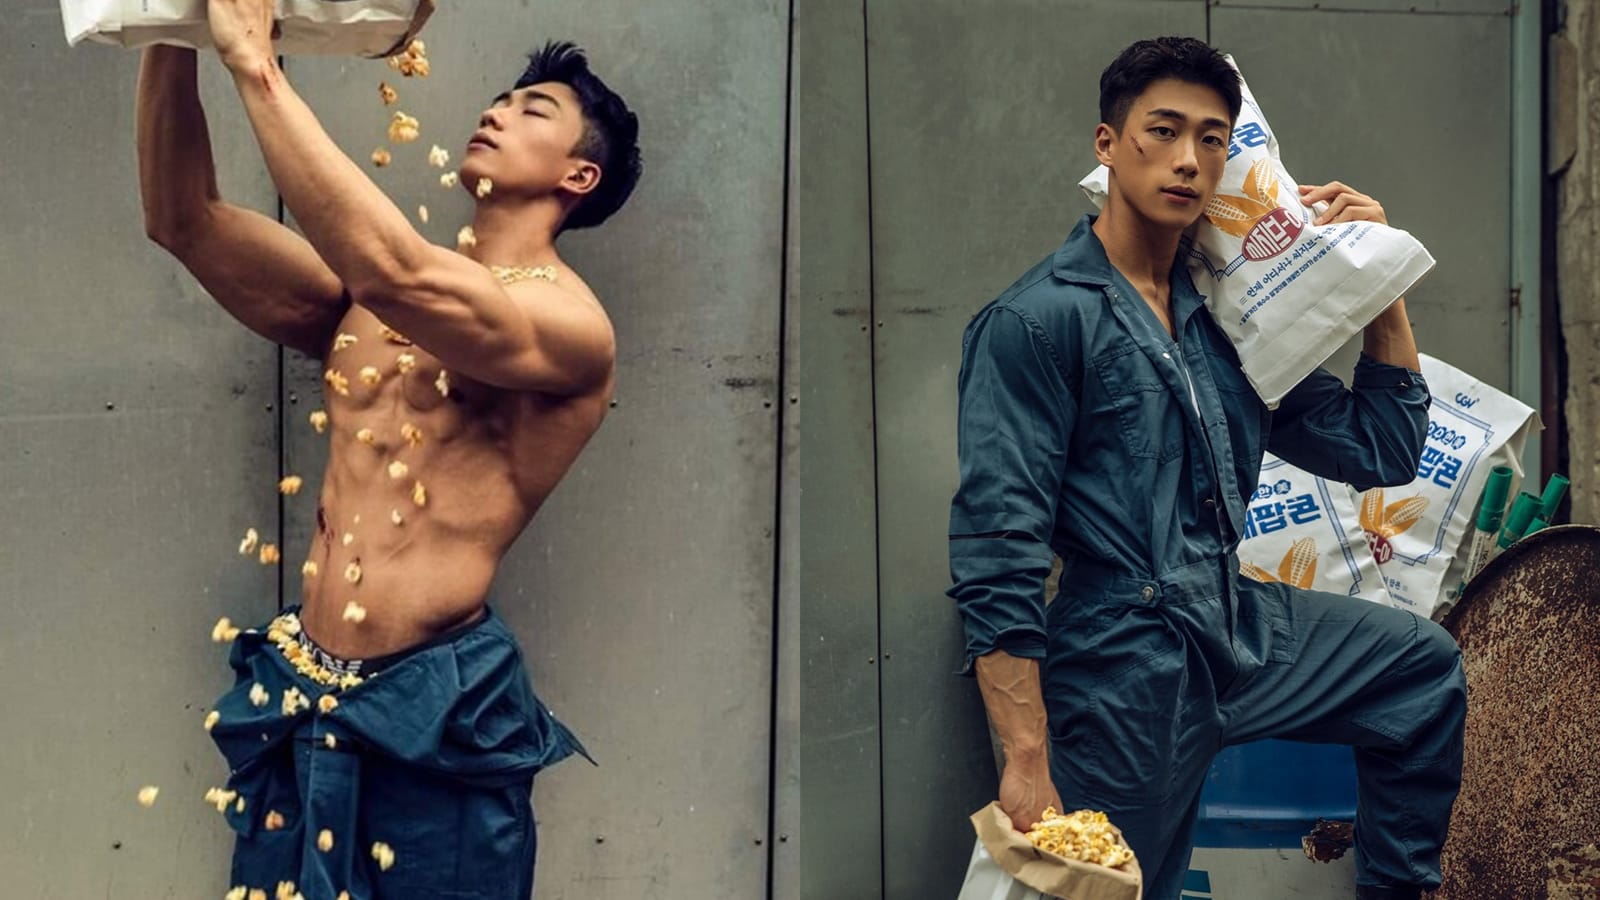 Korean Cinema Chain Removes Shirtless Pics Of Model From Campaign After Netizens Complain That He’s Being Objectified